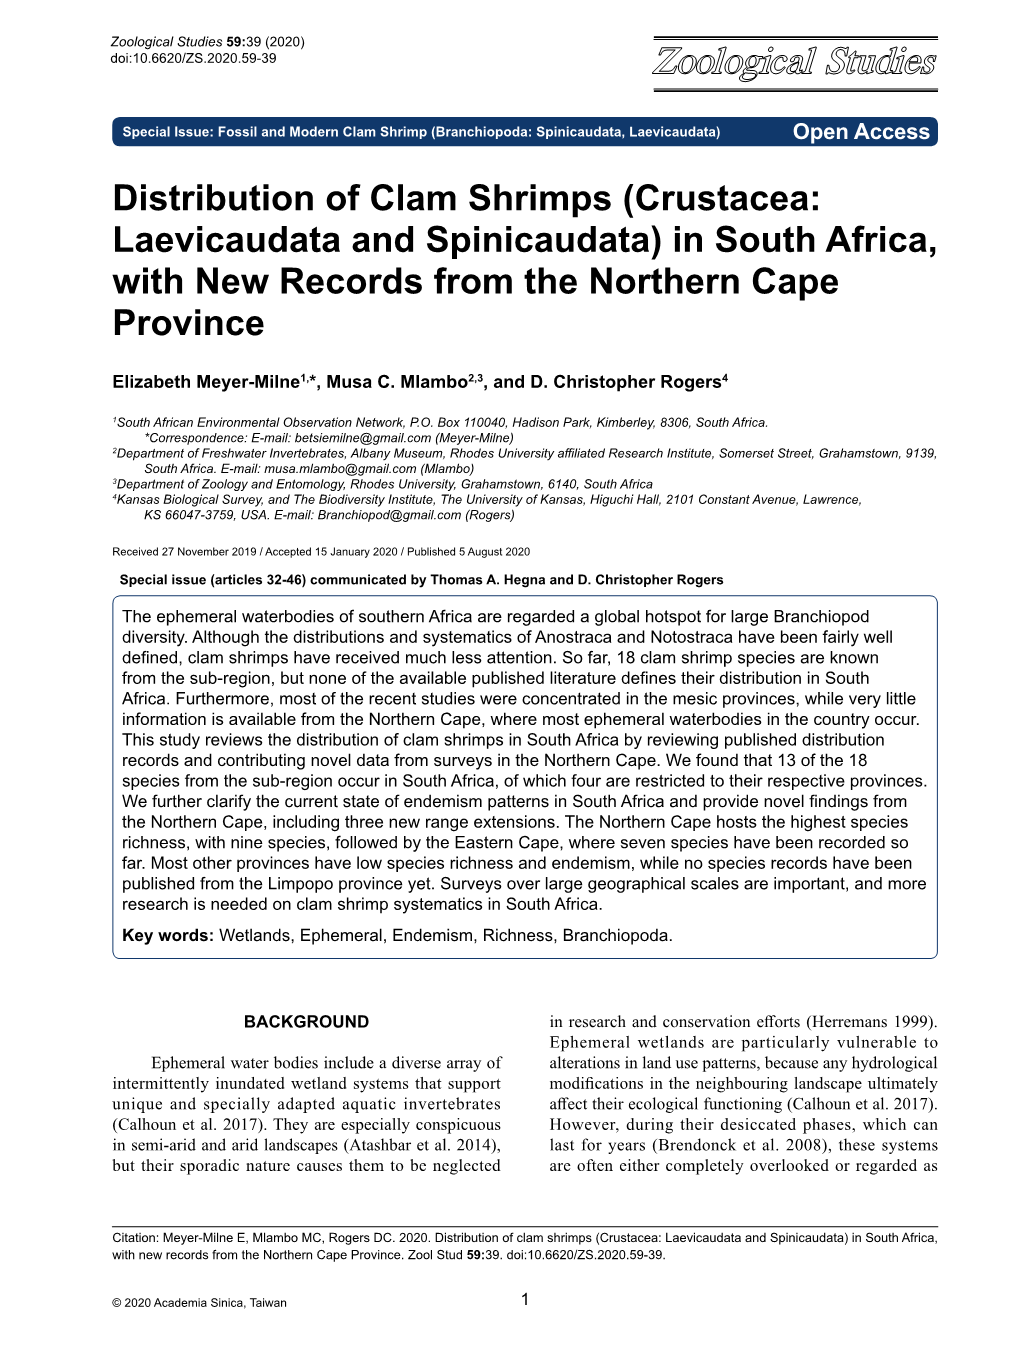 Distribution of Clam Shrimps (Crustacea: Laevicaudata and Spinicaudata) in South Africa, with New Records from the Northern Cape Province